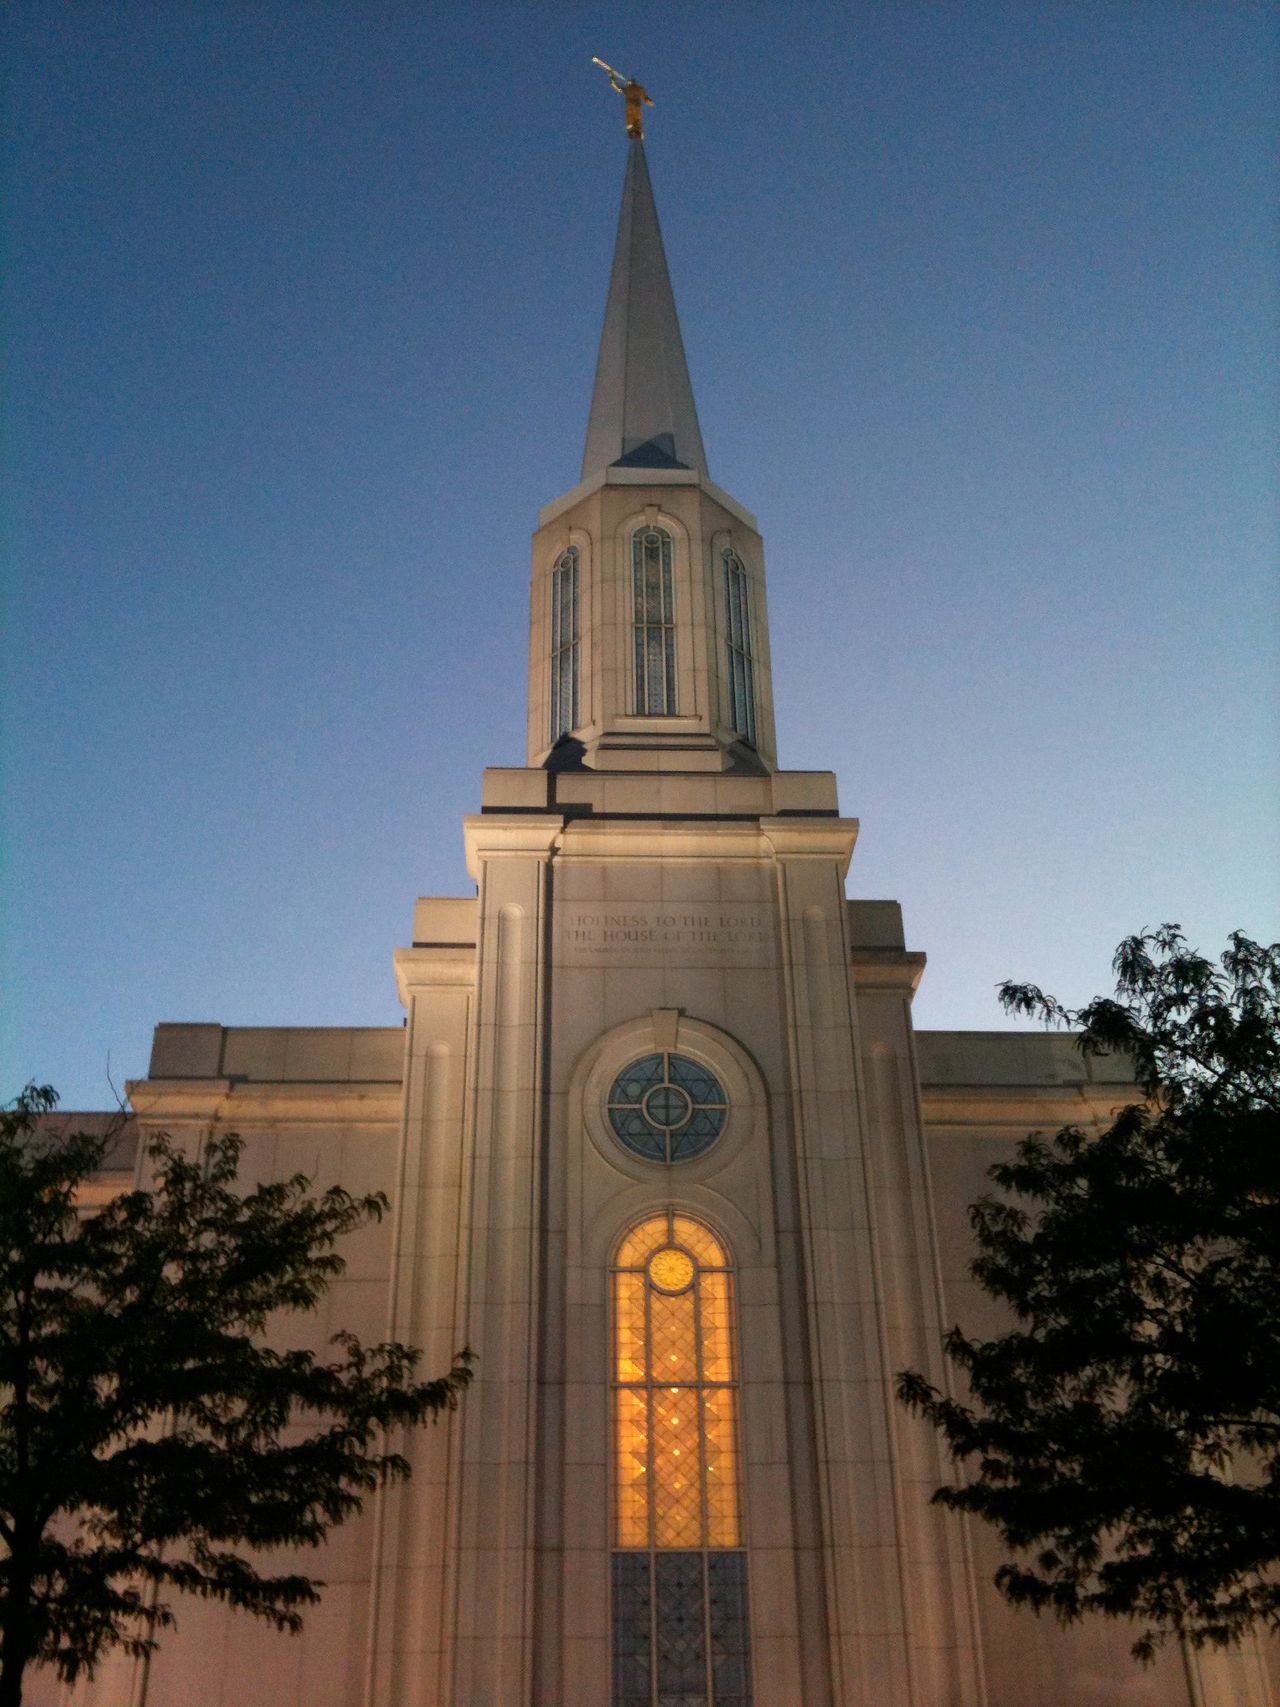 The St. Louis Missouri Temple in the evening, including the windows and spire.  